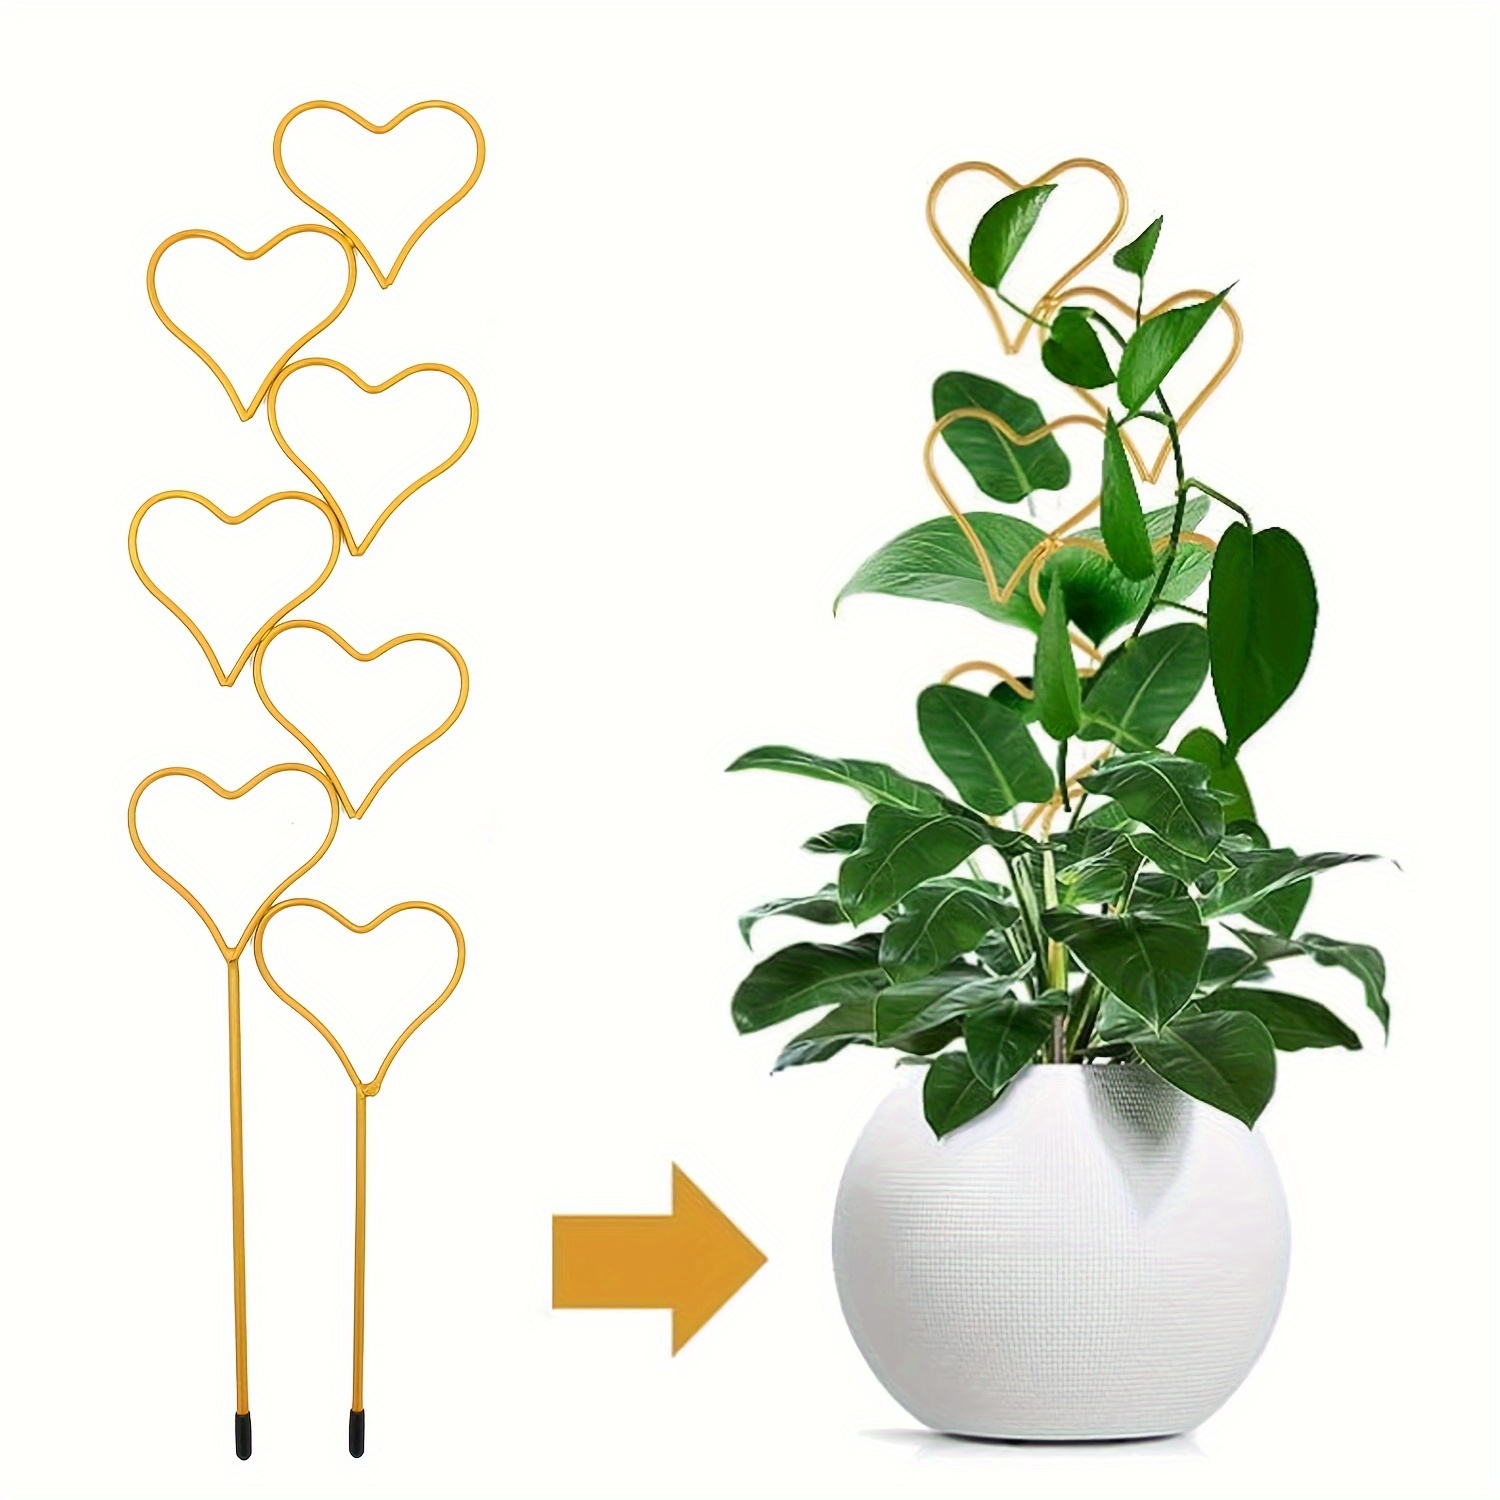 

1pc, Golden Trelli For Potted Plants, Samll Trellis For Climbing Plant Flower Stackable Houseplant, Heart Shaped Trellis For Vine Plant Support Indoor Decoration Plant Climbing Holder Rack